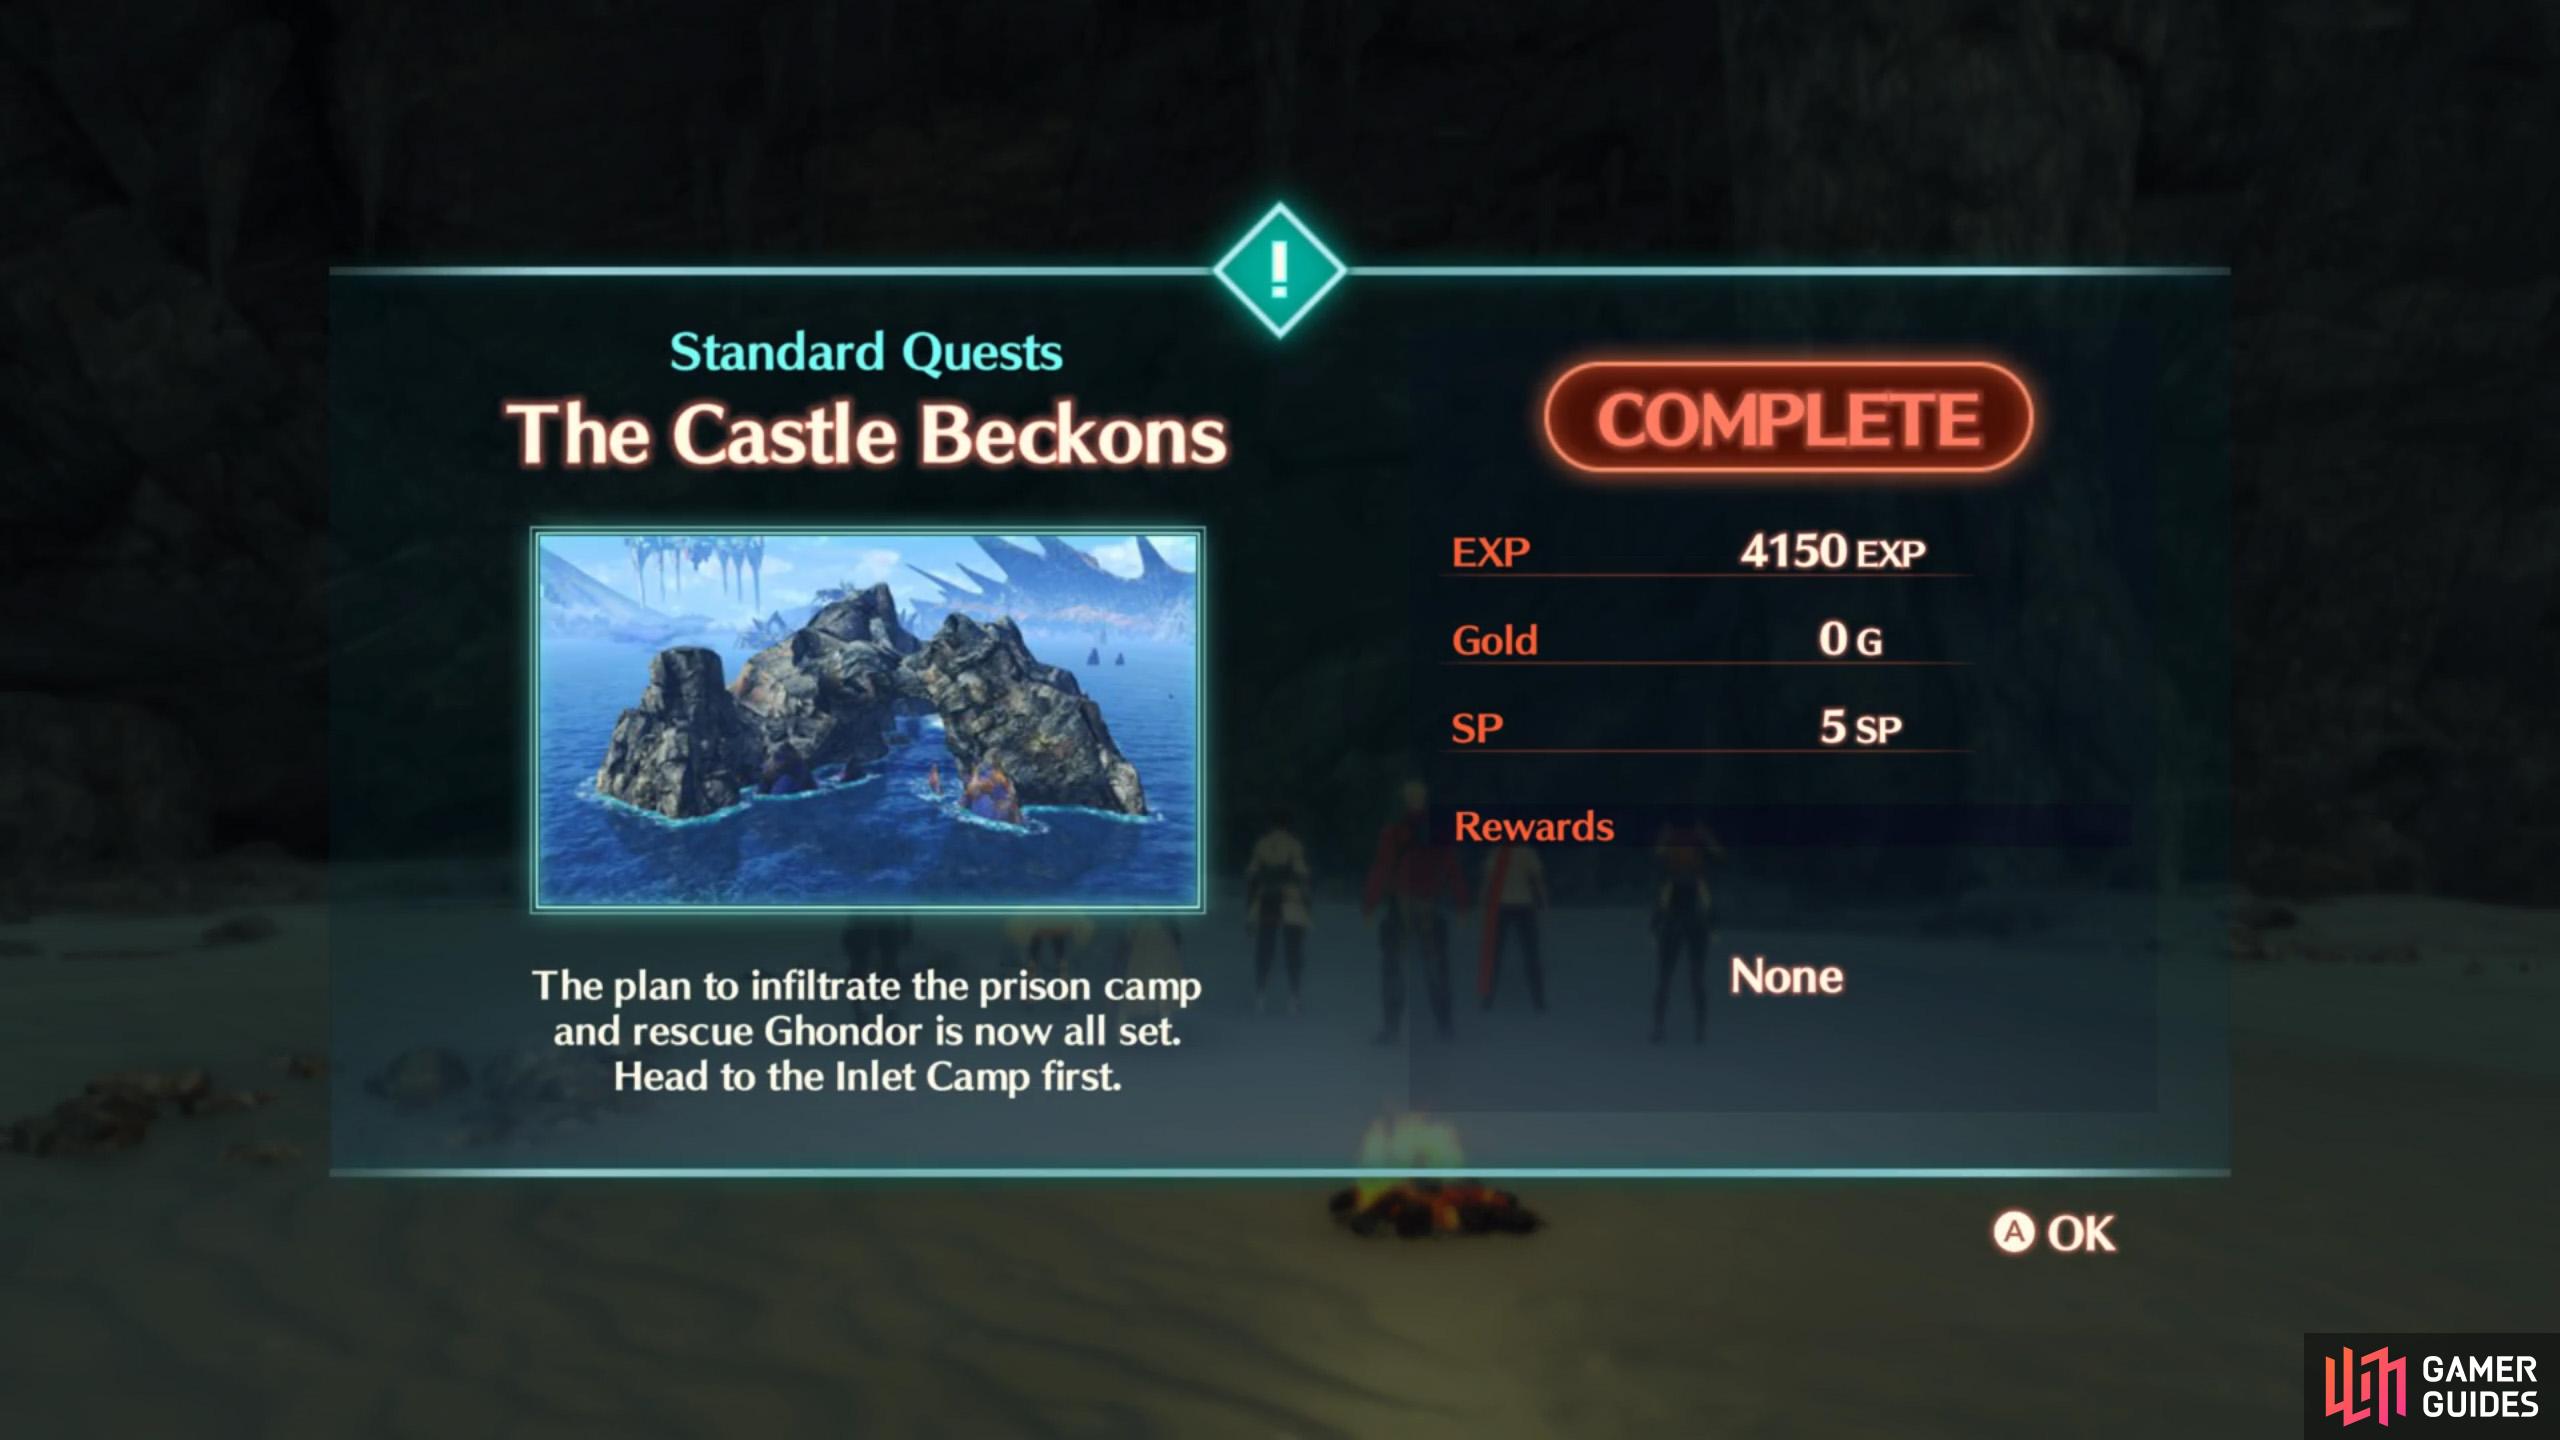 This also concludes the "The Castle Beckons" quest.